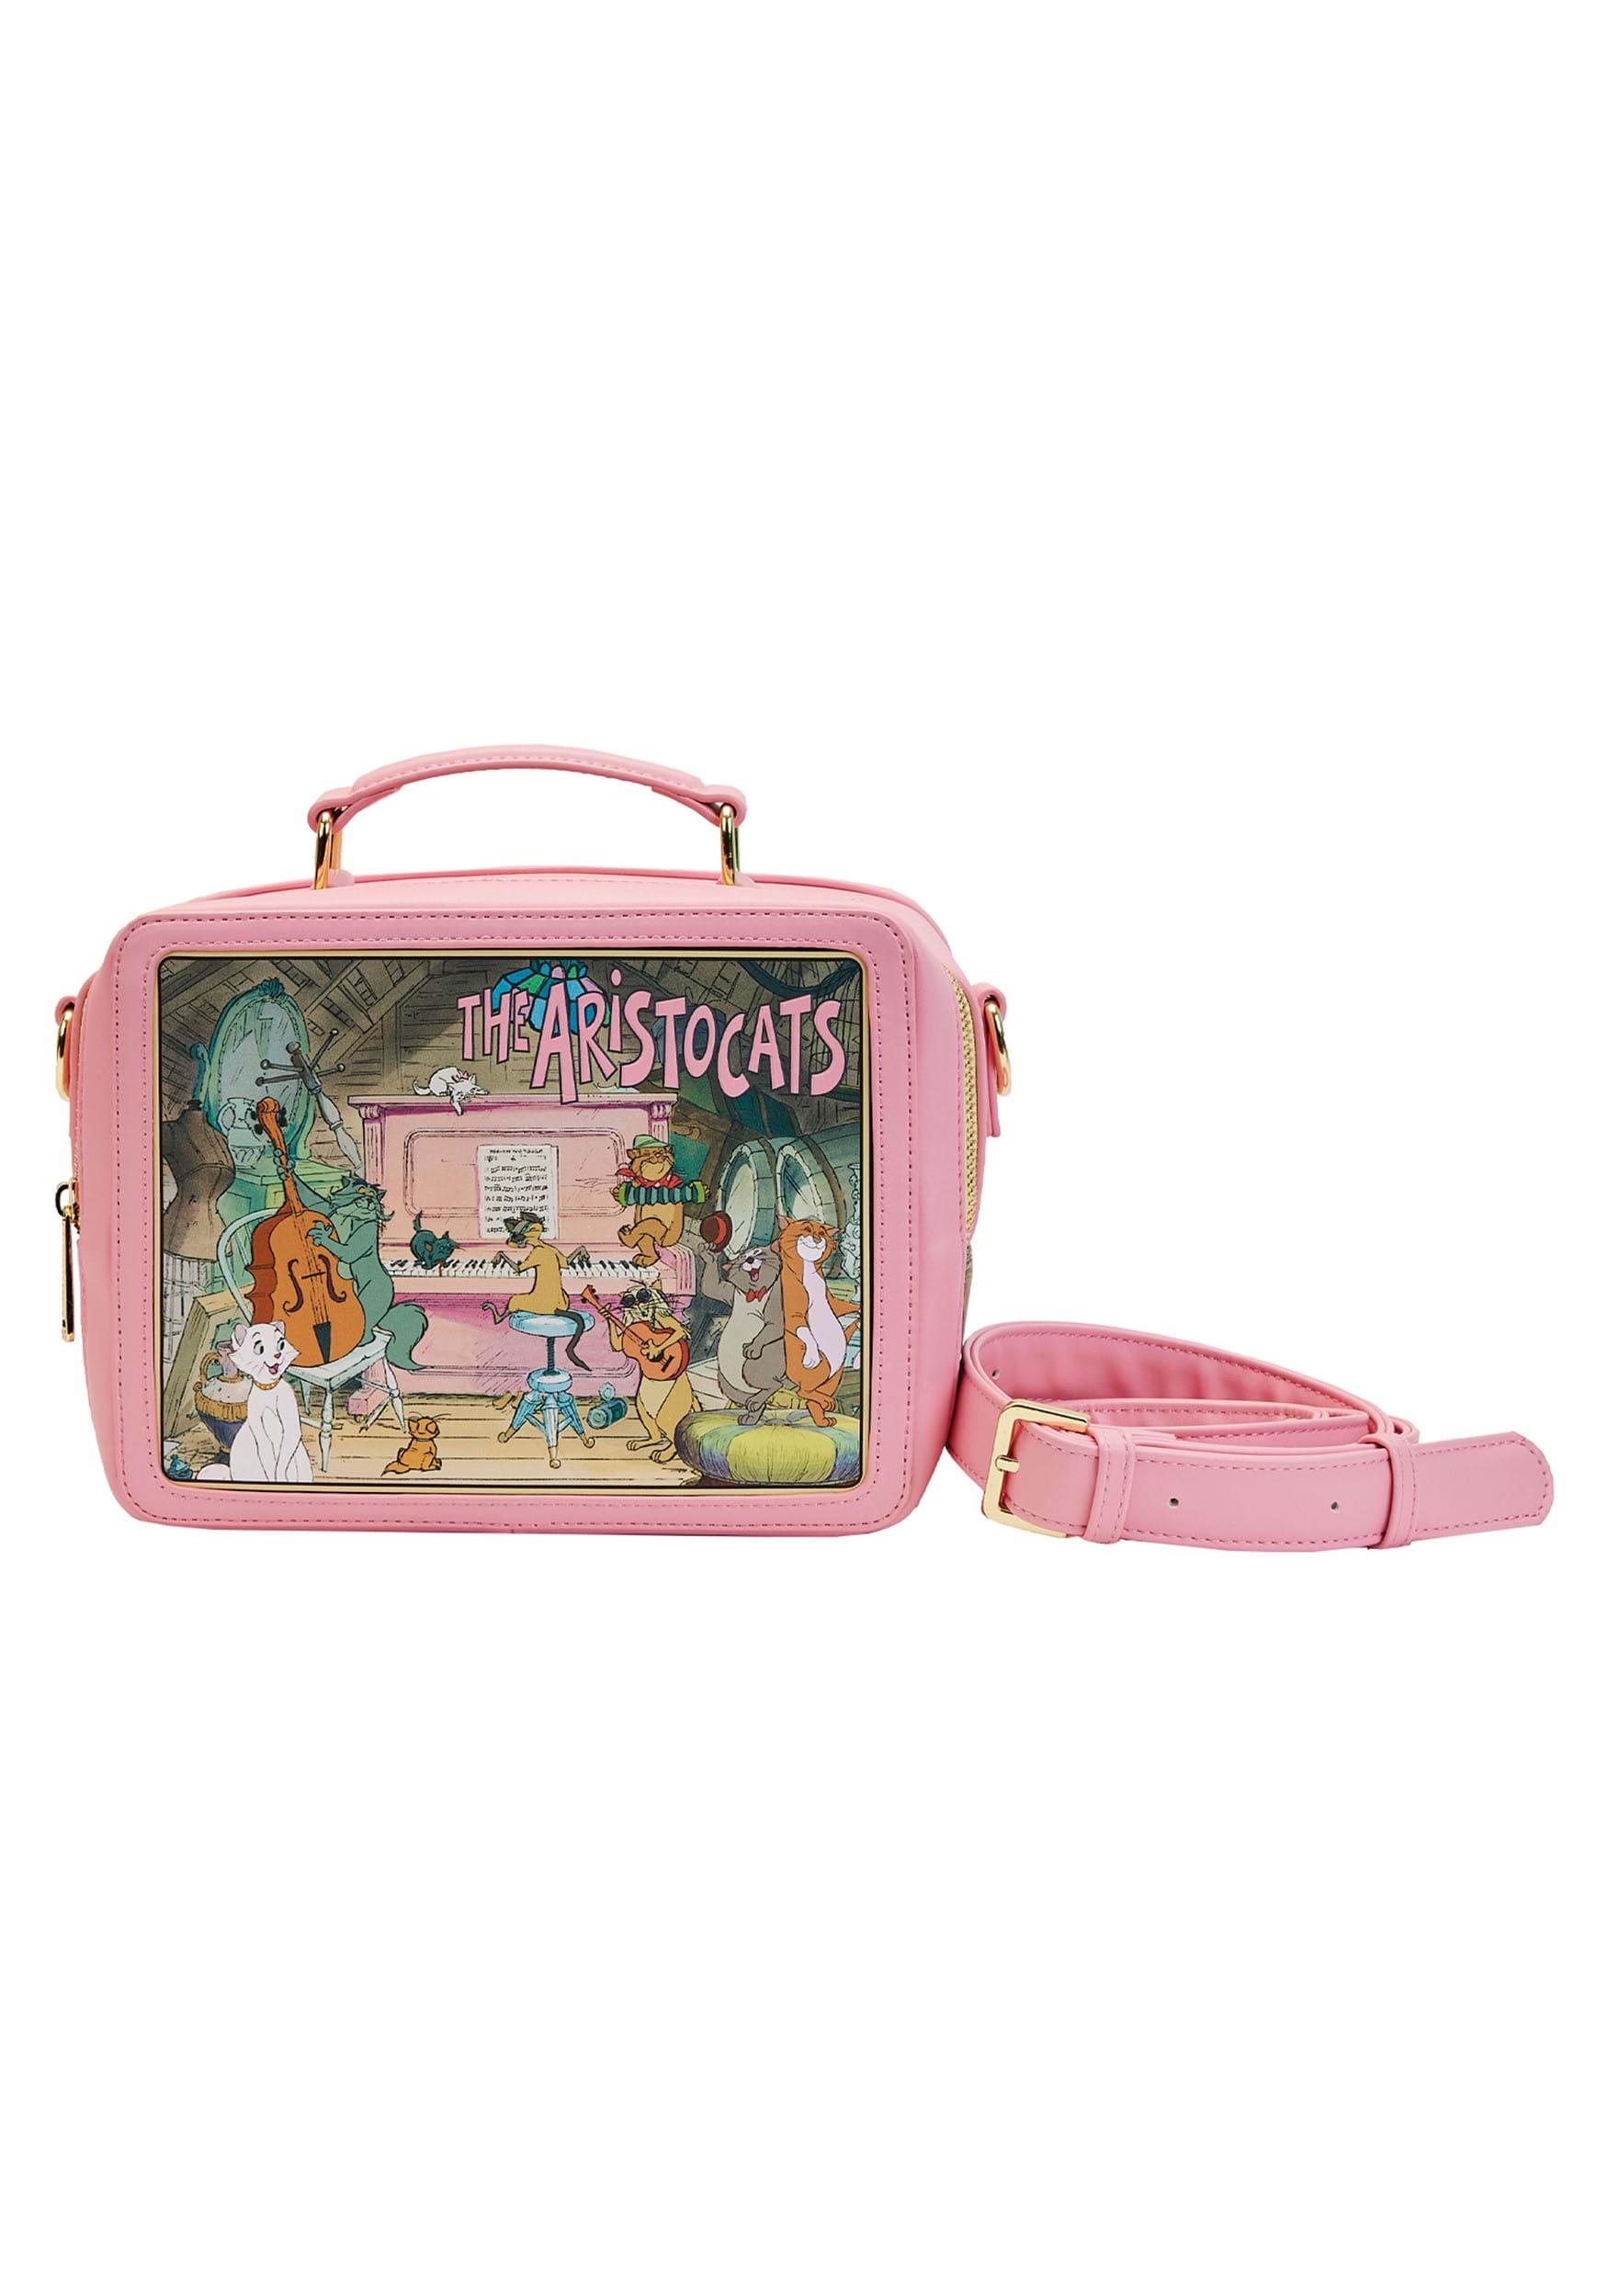 https://images.fun.com/products/90861/1-1/loungefly-disney-the-aristocats-lunchbox-crossbody-bag.jpg